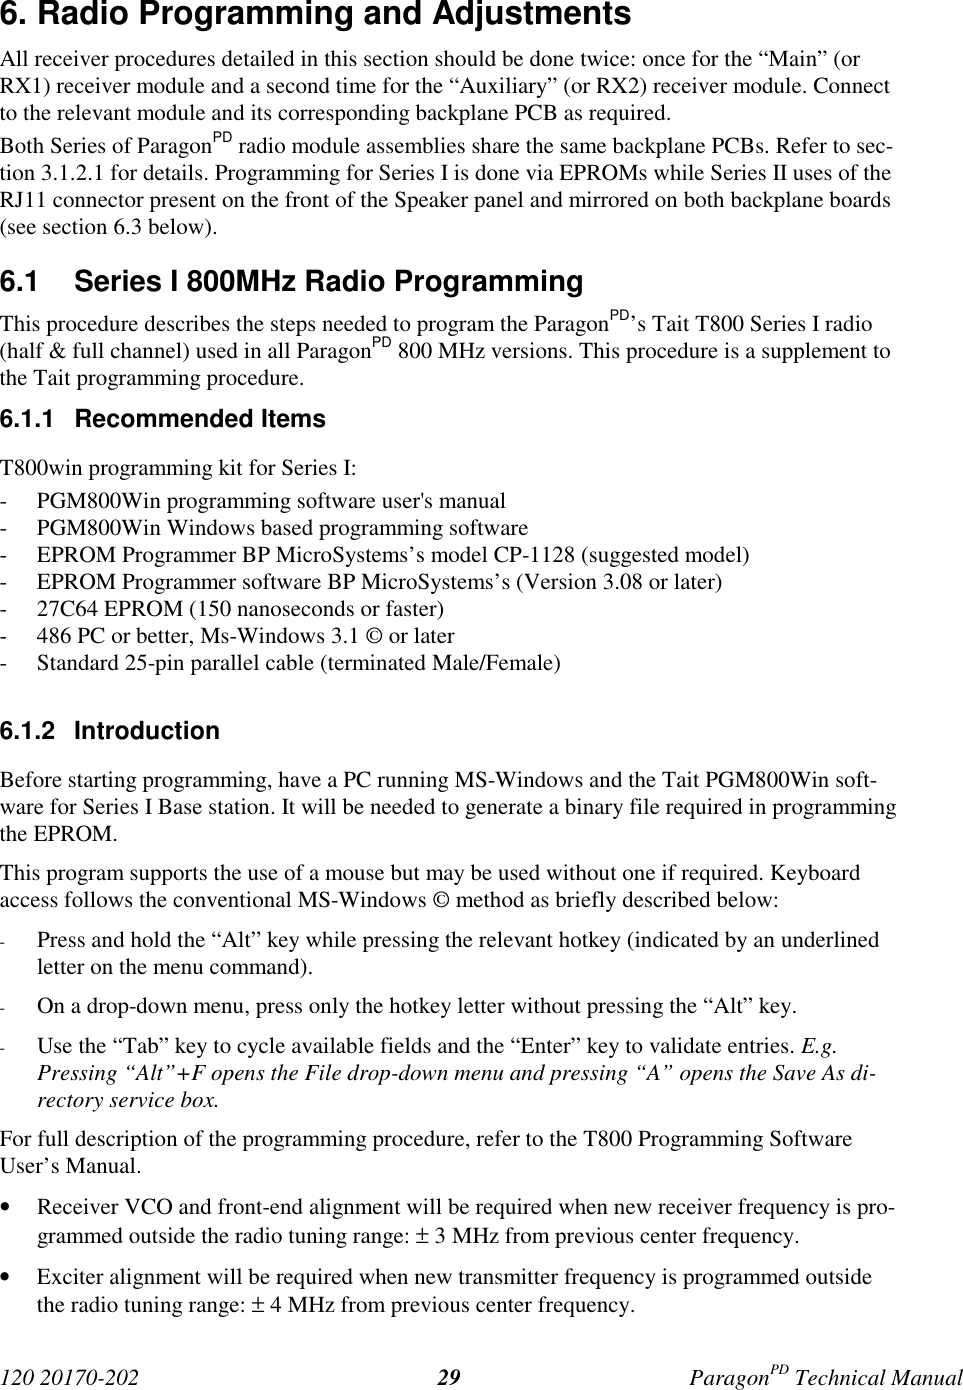 120 20170-202 ParagonPD Technical Manual296. Radio Programming and AdjustmentsAll receiver procedures detailed in this section should be done twice: once for the “Main” (orRX1) receiver module and a second time for the “Auxiliary” (or RX2) receiver module. Connectto the relevant module and its corresponding backplane PCB as required.Both Series of ParagonPD radio module assemblies share the same backplane PCBs. Refer to sec-tion 3.1.2.1 for details. Programming for Series I is done via EPROMs while Series II uses of theRJ11 connector present on the front of the Speaker panel and mirrored on both backplane boards(see section 6.3 below).6.1  Series I 800MHz Radio ProgrammingThis procedure describes the steps needed to program the ParagonPD’s Tait T800 Series I radio(half &amp; full channel) used in all ParagonPD 800 MHz versions. This procedure is a supplement tothe Tait programming procedure.6.1.1 Recommended ItemsT800win programming kit for Series I:- PGM800Win programming software user&apos;s manual- PGM800Win Windows based programming software- EPROM Programmer BP MicroSystems’s model CP-1128 (suggested model)- EPROM Programmer software BP MicroSystems’s (Version 3.08 or later)- 27C64 EPROM (150 nanoseconds or faster)- 486 PC or better, Ms-Windows 3.1 © or later- Standard 25-pin parallel cable (terminated Male/Female)6.1.2 IntroductionBefore starting programming, have a PC running MS-Windows and the Tait PGM800Win soft-ware for Series I Base station. It will be needed to generate a binary file required in programmingthe EPROM.This program supports the use of a mouse but may be used without one if required. Keyboardaccess follows the conventional MS-Windows © method as briefly described below:- Press and hold the “Alt” key while pressing the relevant hotkey (indicated by an underlinedletter on the menu command).- On a drop-down menu, press only the hotkey letter without pressing the “Alt” key.- Use the “Tab” key to cycle available fields and the “Enter” key to validate entries. E.g.Pressing “Alt”+F opens the File drop-down menu and pressing “A” opens the Save As di-rectory service box.For full description of the programming procedure, refer to the T800 Programming SoftwareUser’s Manual.• Receiver VCO and front-end alignment will be required when new receiver frequency is pro-grammed outside the radio tuning range: ± 3 MHz from previous center frequency.• Exciter alignment will be required when new transmitter frequency is programmed outsidethe radio tuning range: ± 4 MHz from previous center frequency.